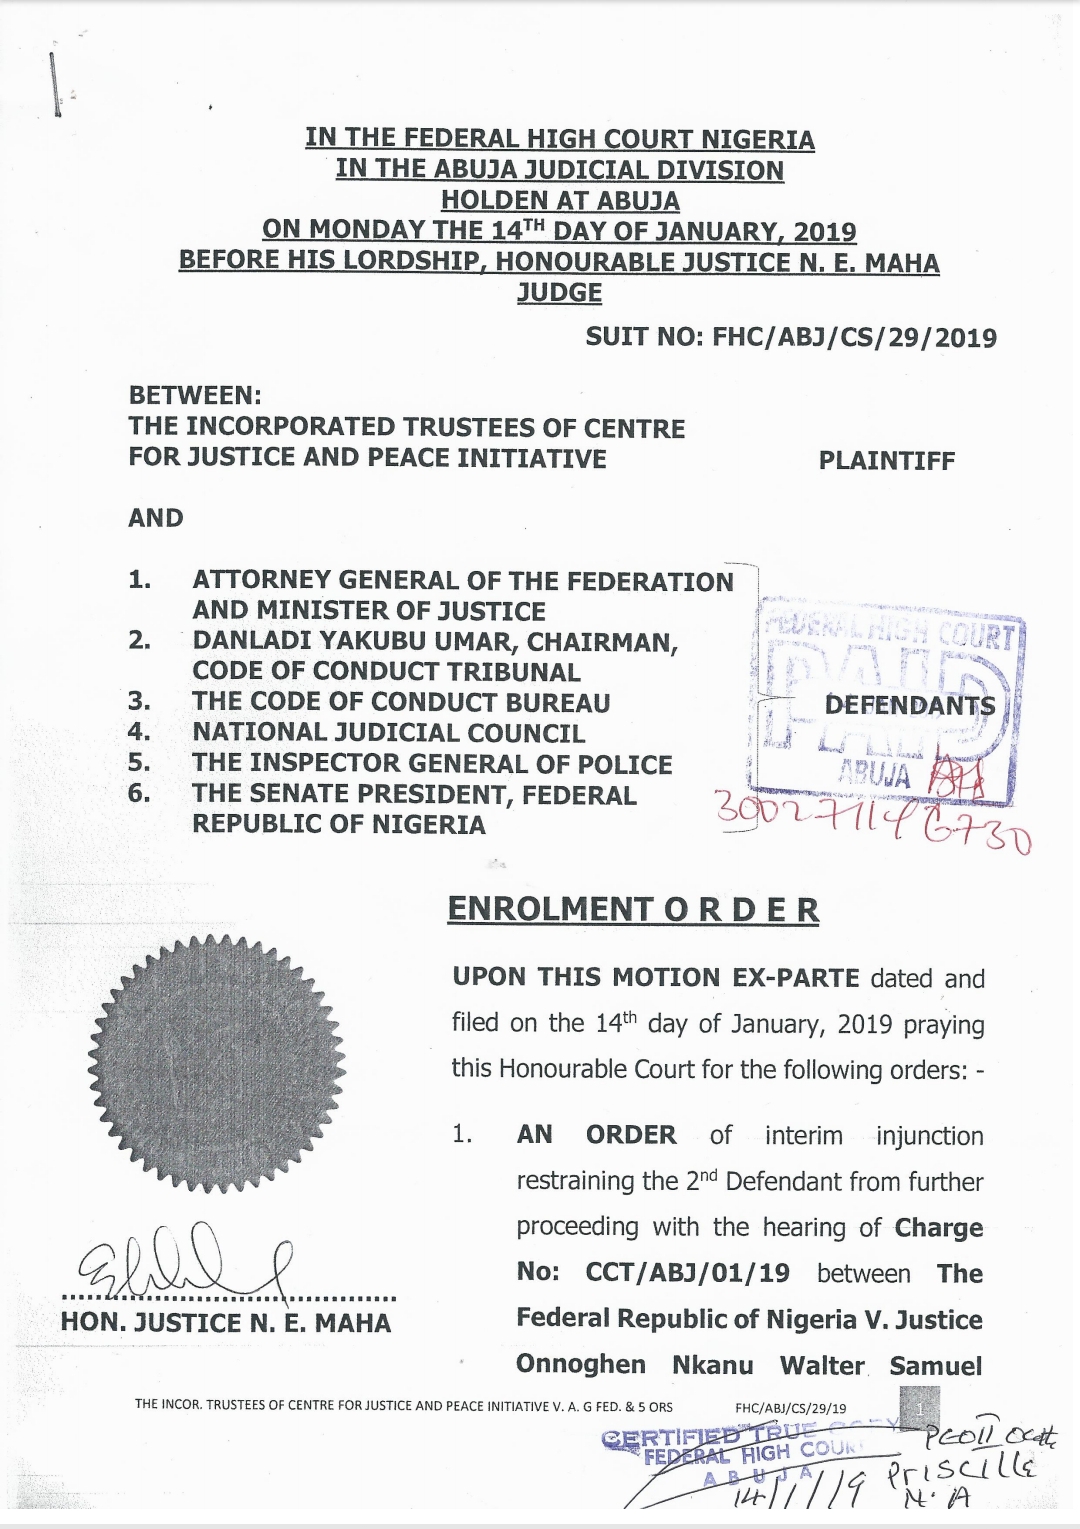 Court Order Directing The CCT To Stay Proceedings In The Matter Against Tne CJN